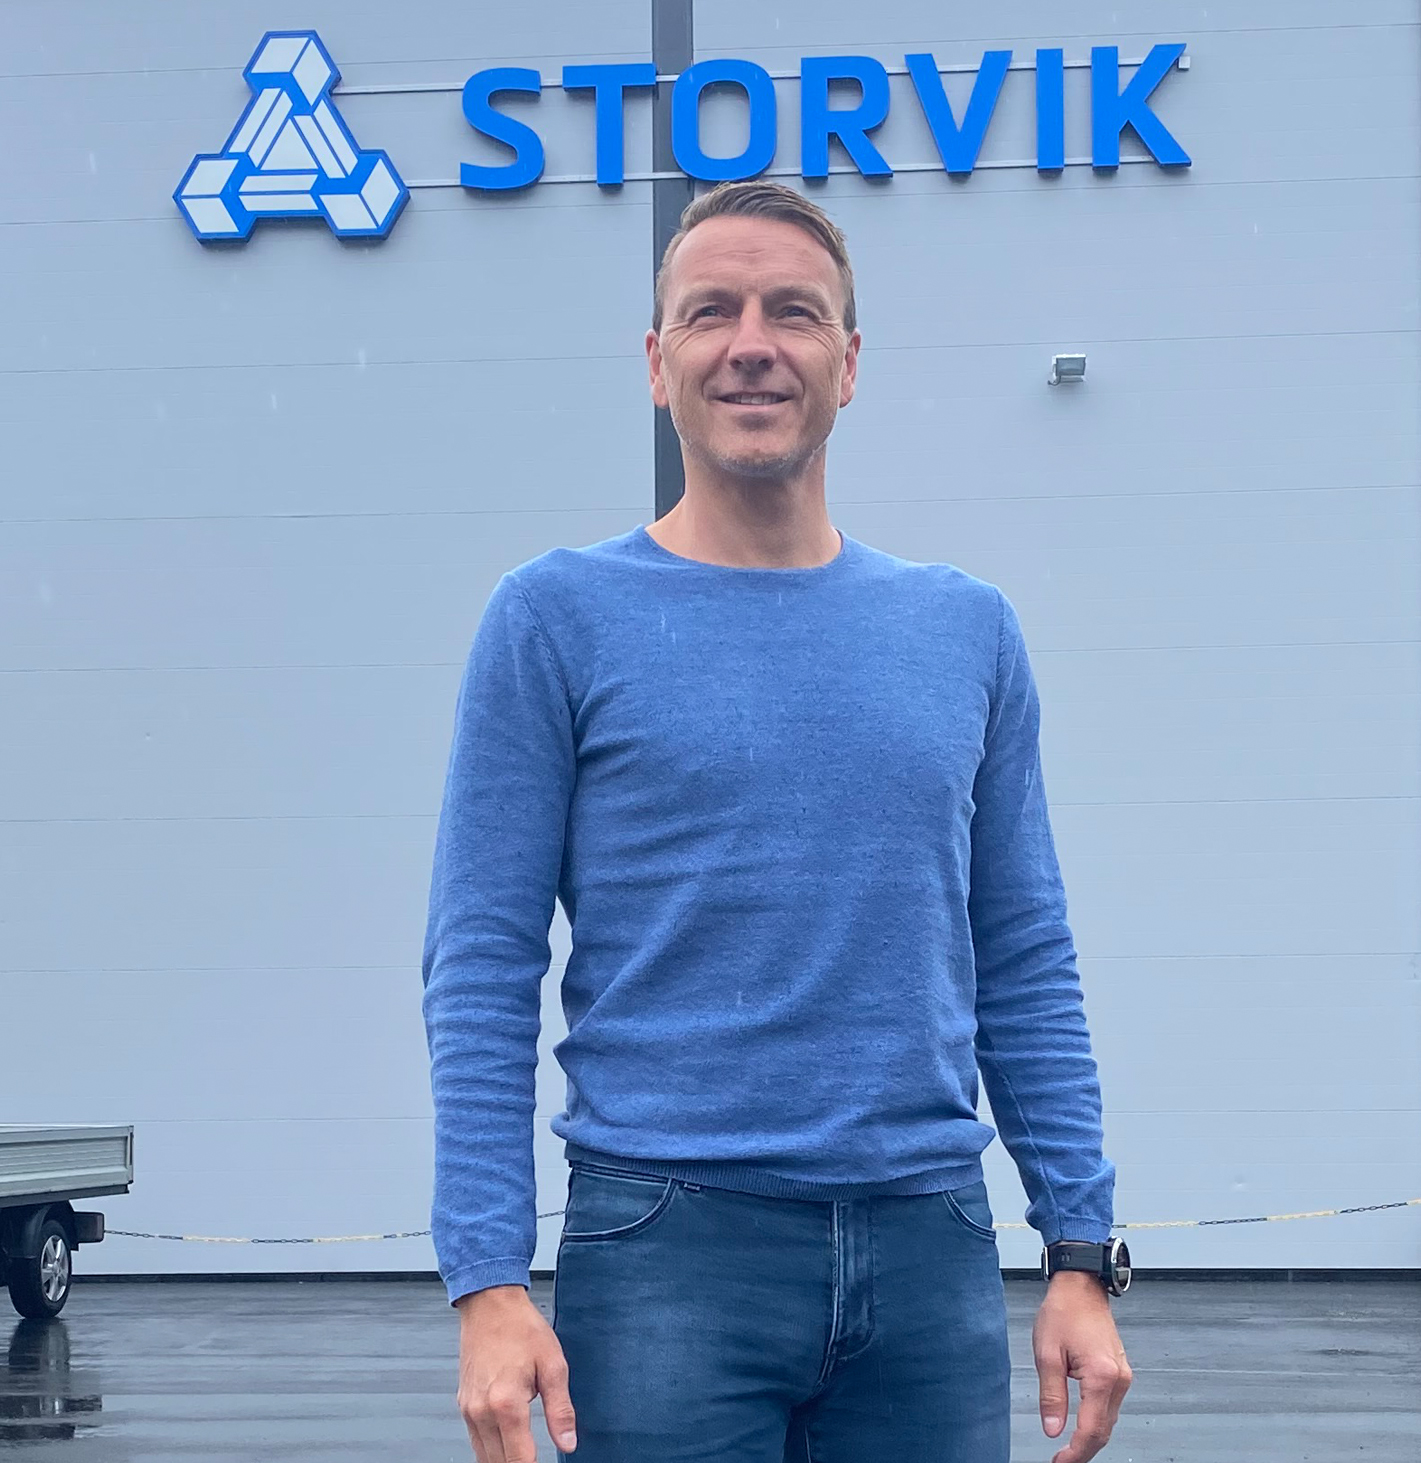 Storvik has entered a multimillion-dollar contract with Hydro